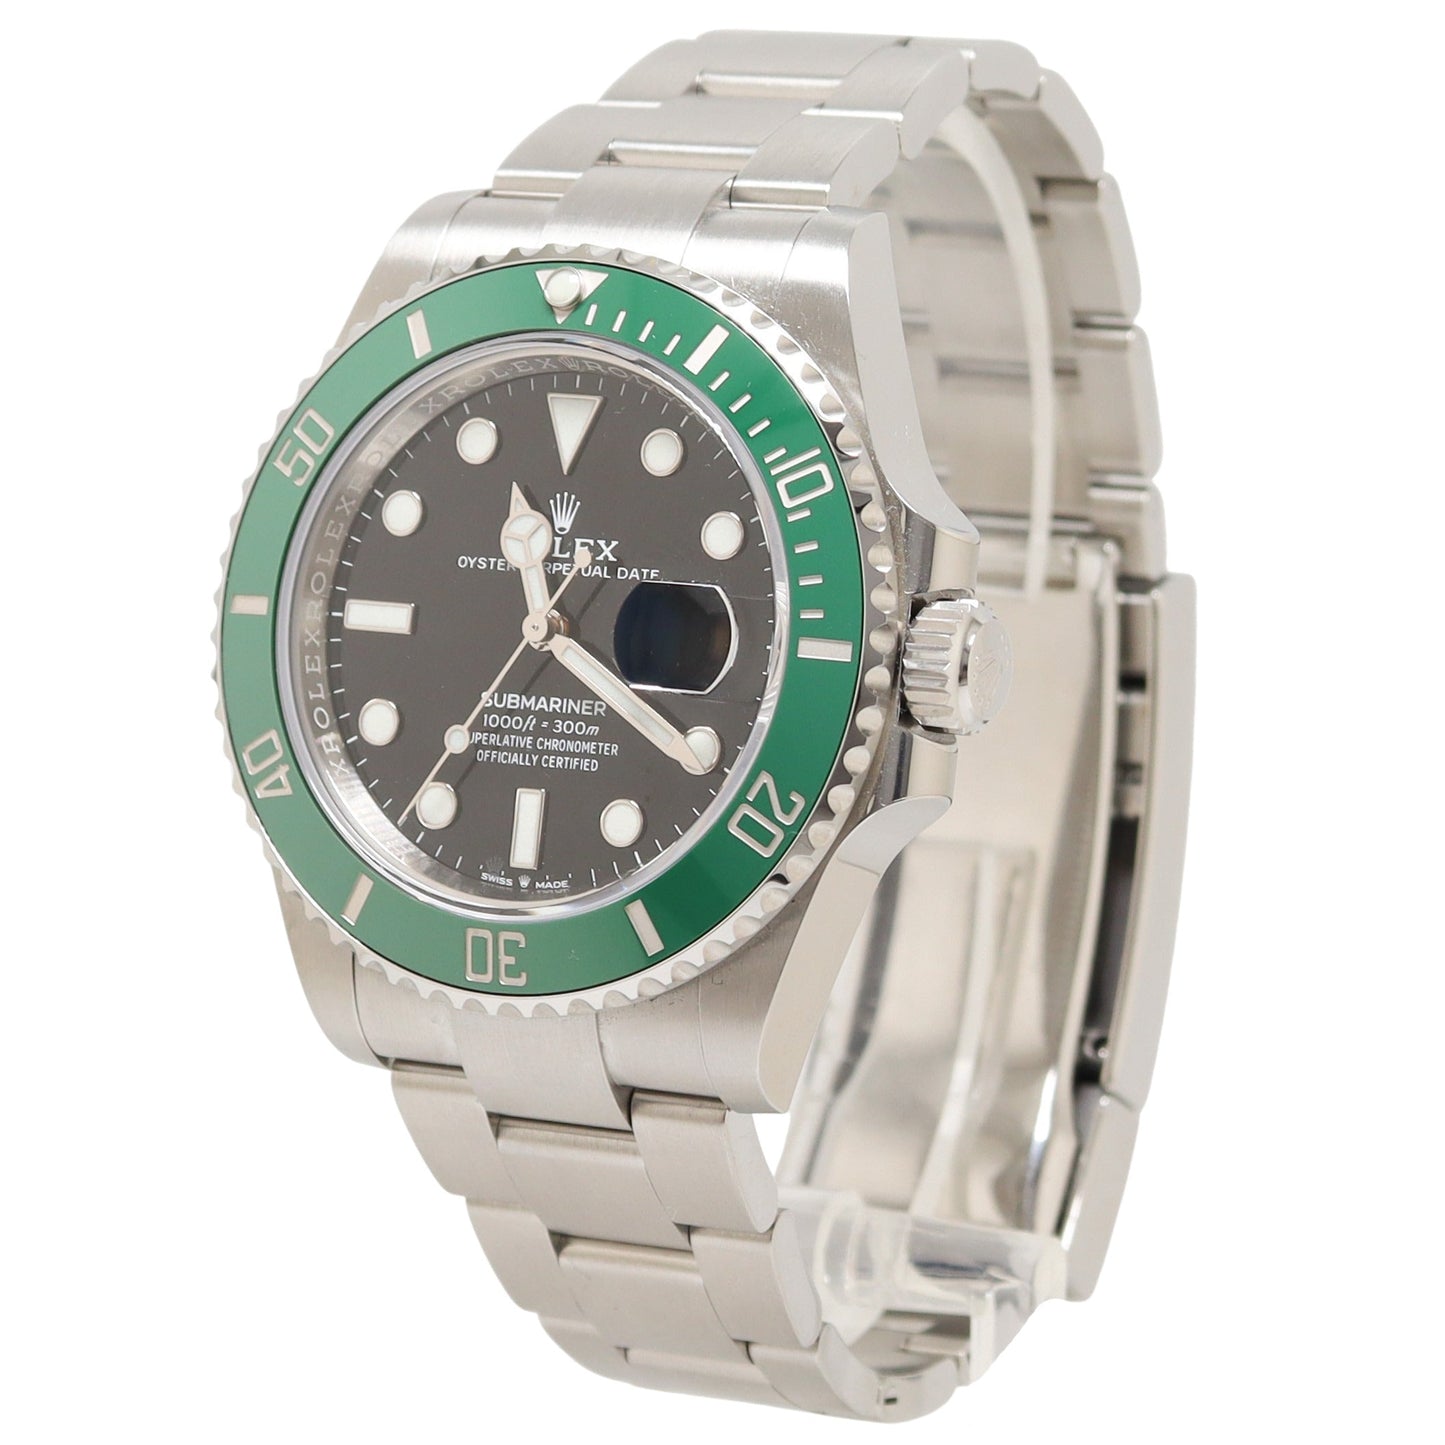 Rolex Submariner "Starbucks" Stainless Steel 41mm Black Dot Dial Watch Reference# 126610LV